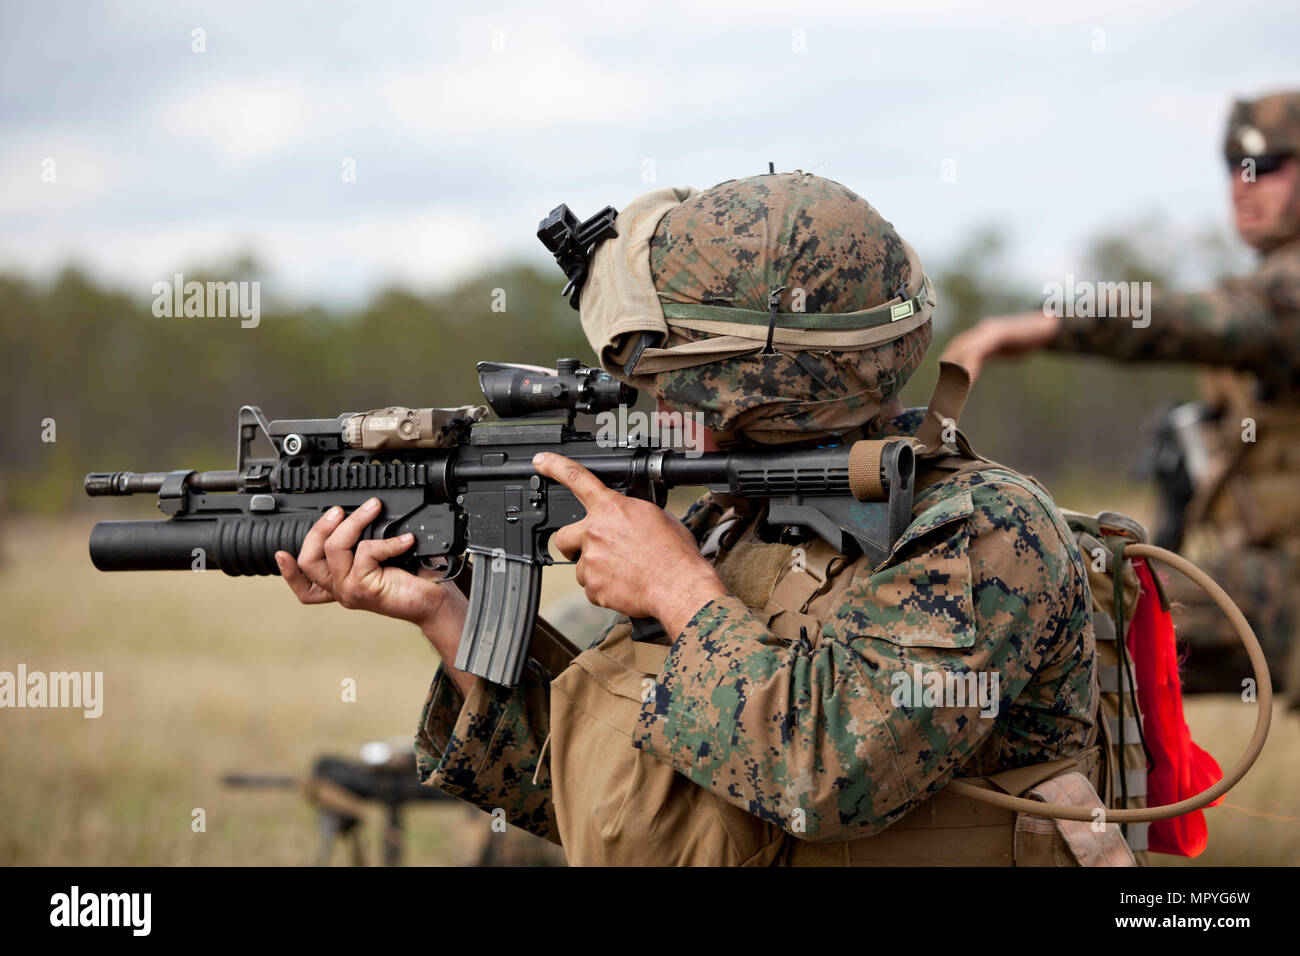 A U.S. Marine attached to Advanced Infantry Training Battalion, School of Infantry-East (SOI-E), fires an M4A1 carbine during a combined arms exercise at Camp Lejeune, N.C., April 7, 2017. The mission of SOI-E is to train entry-level and advanced level Marines in the skills required of an Infantry Marine for the operating forces. (U.S. Marine Corps photo by Lance Cpl. Jose Villalobosrocha) Stock Photo